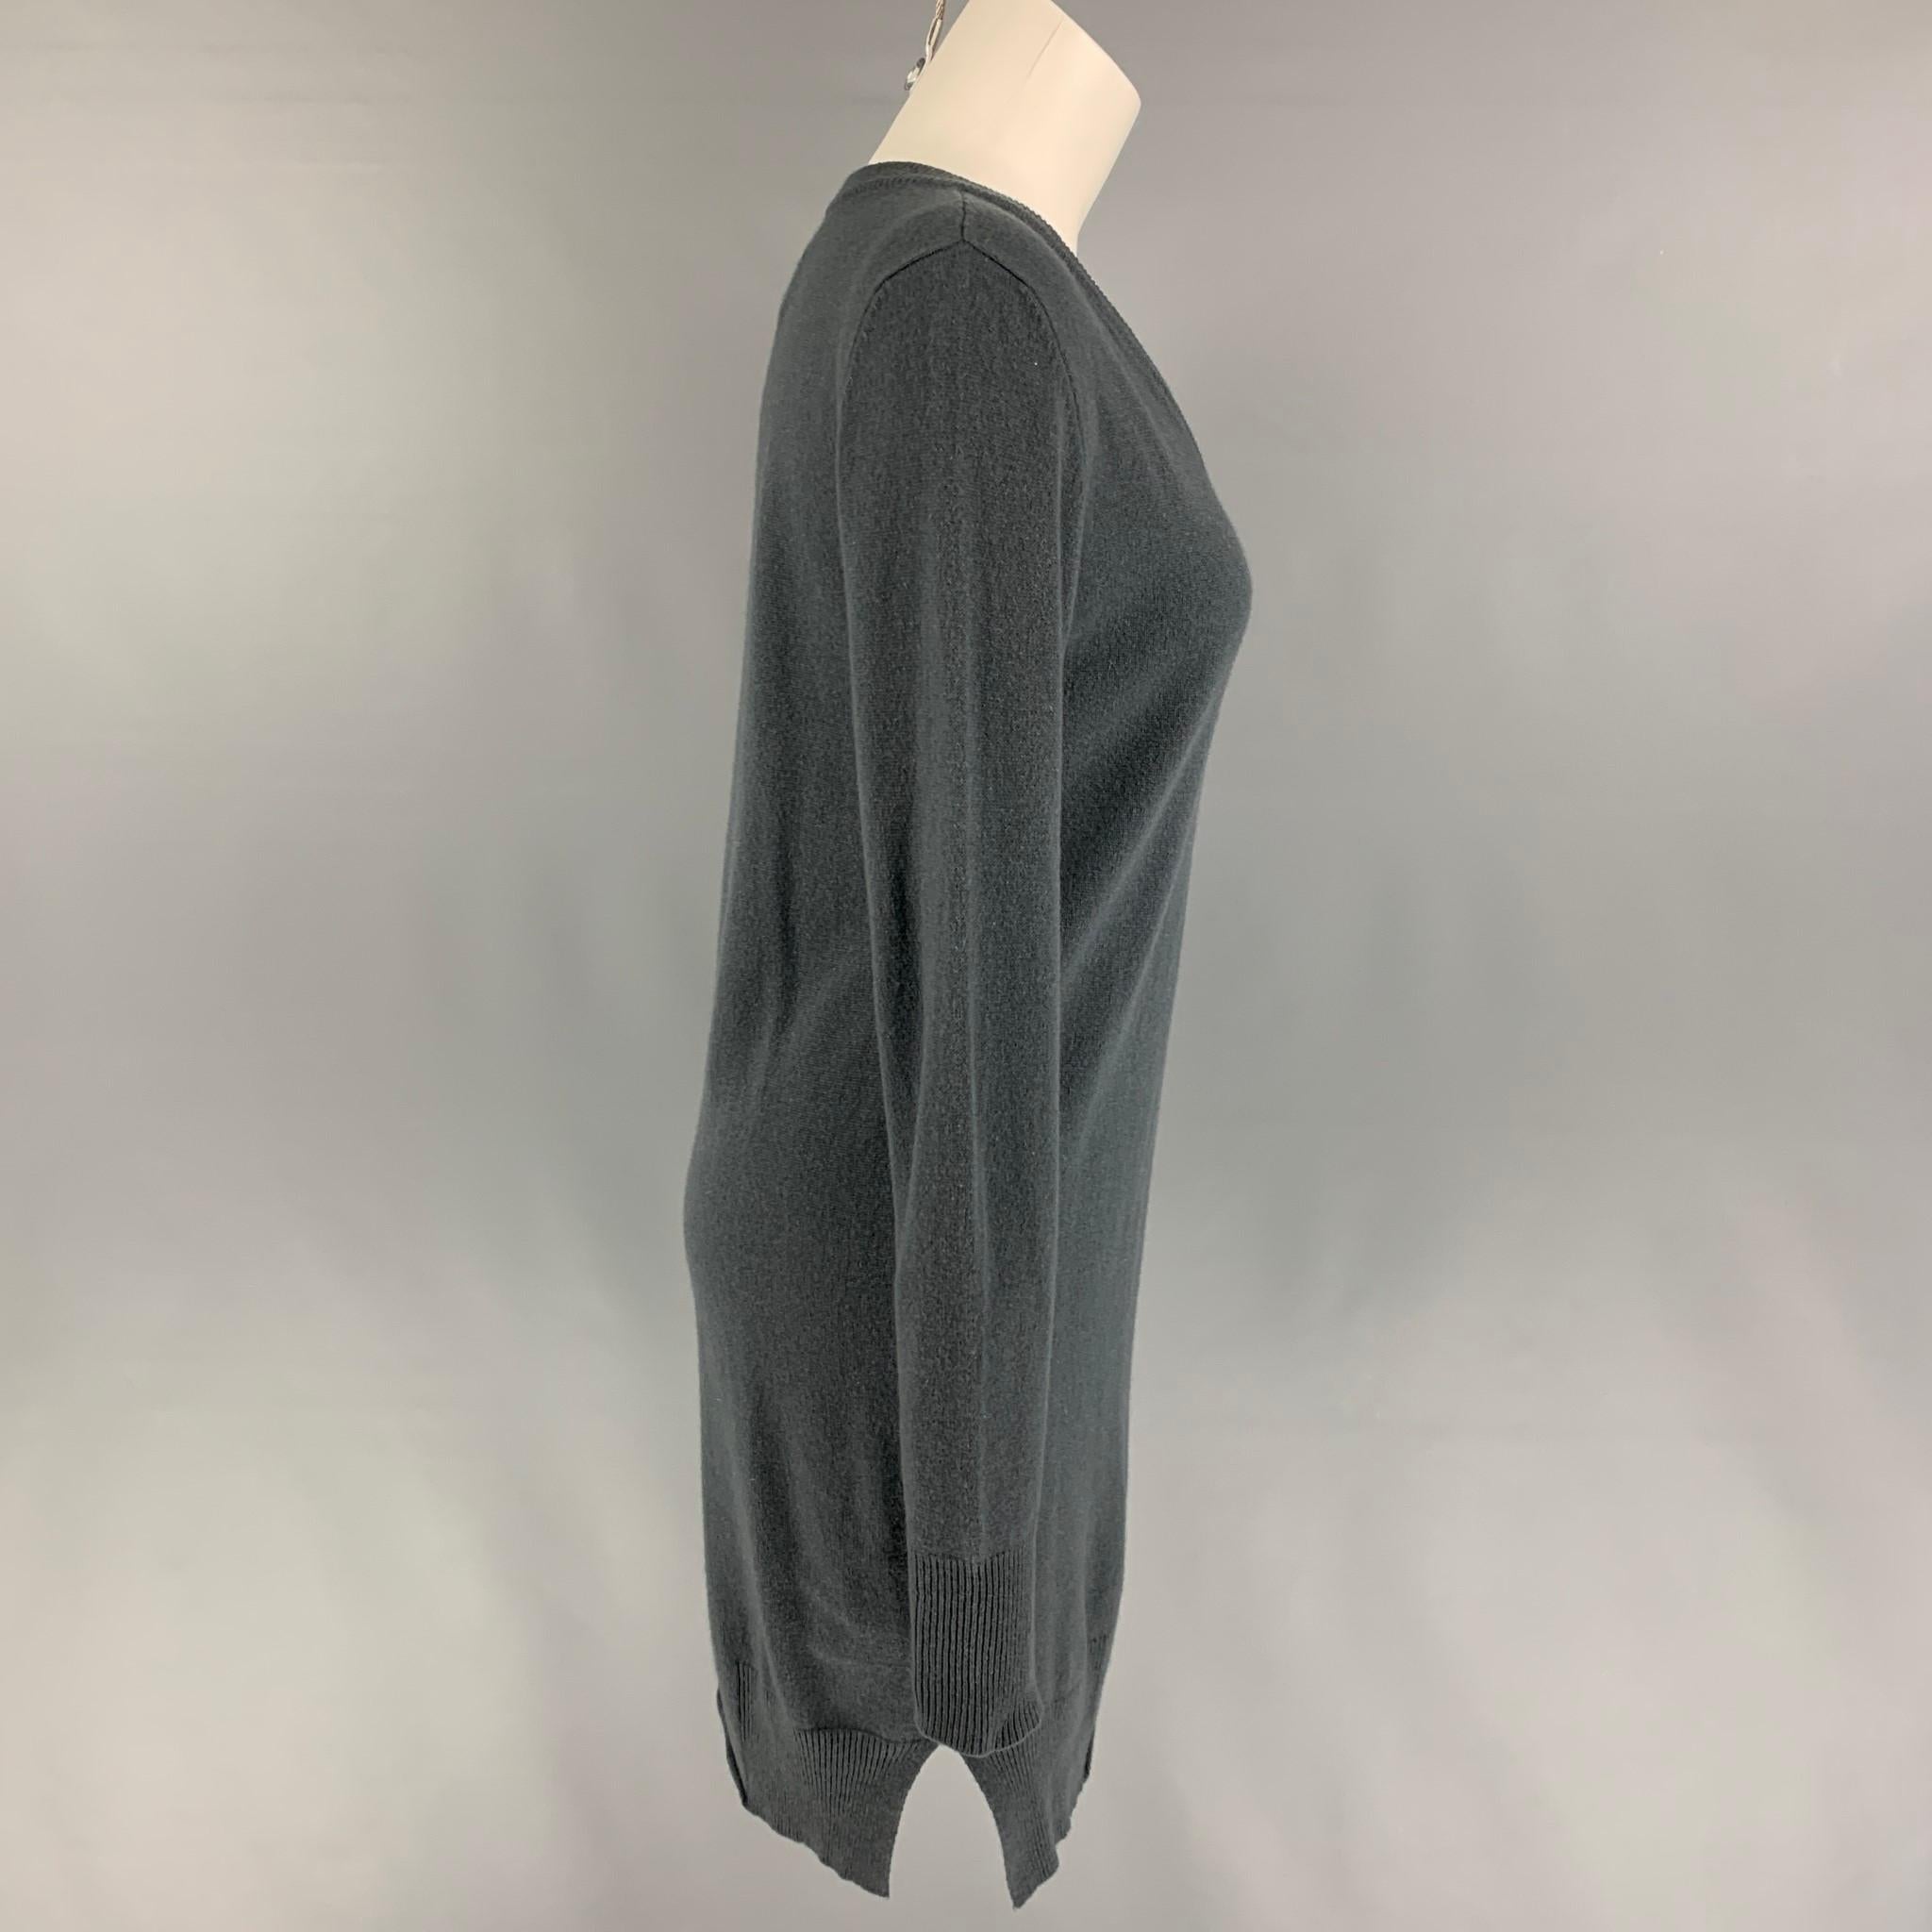 KRISTENSEN DU NORD sweater dress comes in a grey wool blend featuring long sleeves, small side slits, and a v-neck. Made in Italy. 

Very Good Pre-Owned Condition.
Marked: 1

Measurements:

Shoulder: 15.5 in.
Bust: 34 in.
Sleeve: 28 in.
Length: 34